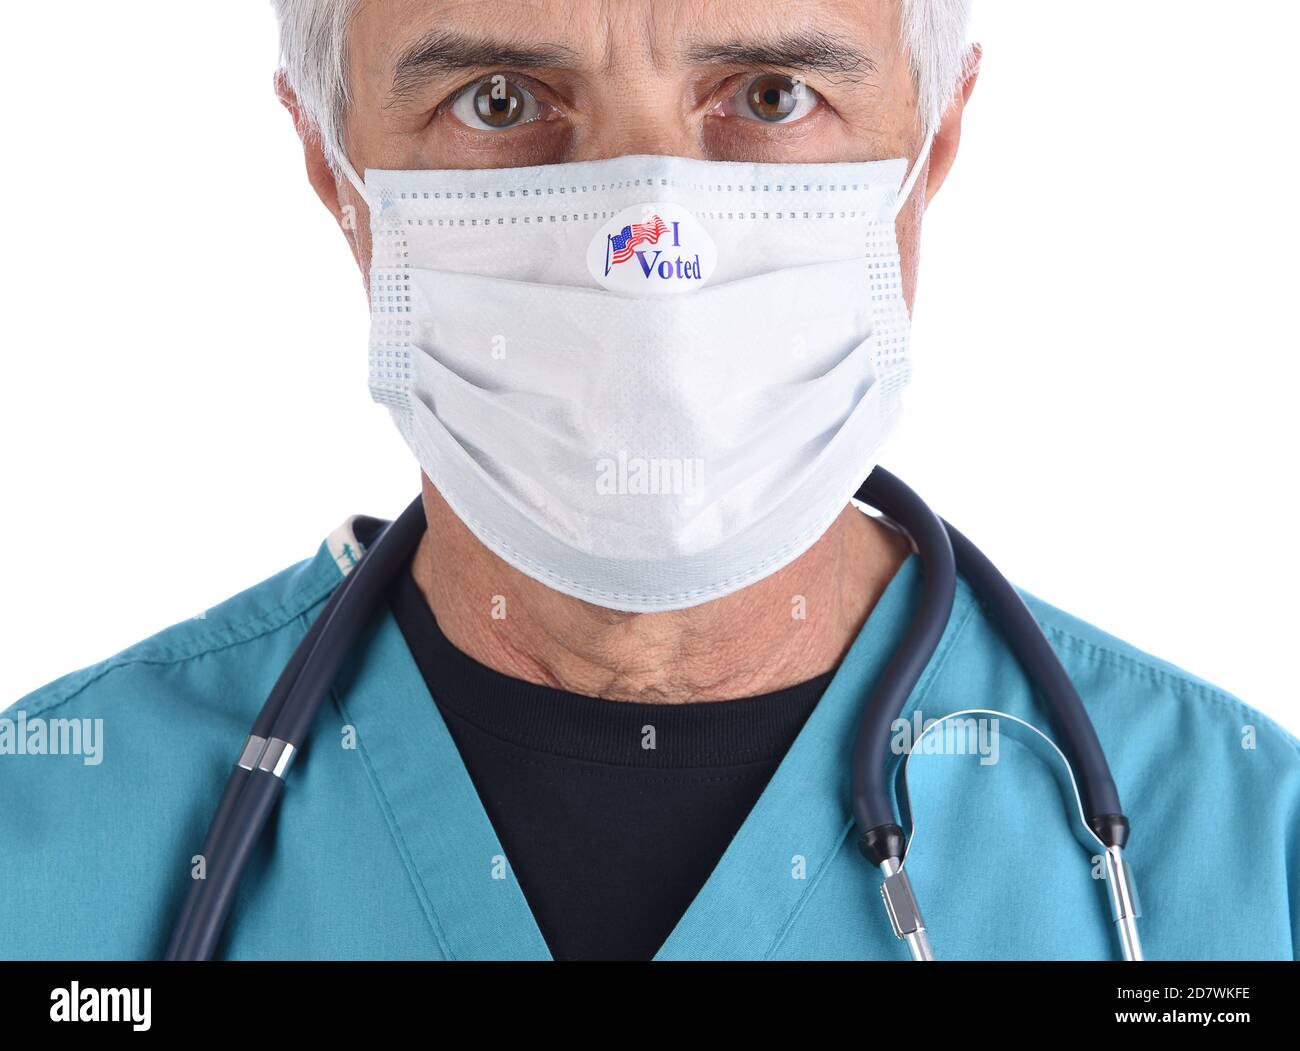 Closeup of a doctor with an I Voted sticker on the COVID-19 protective mask he wore to vote. The man is wearing surgical scrubs with a stethoscope. Stock Photo